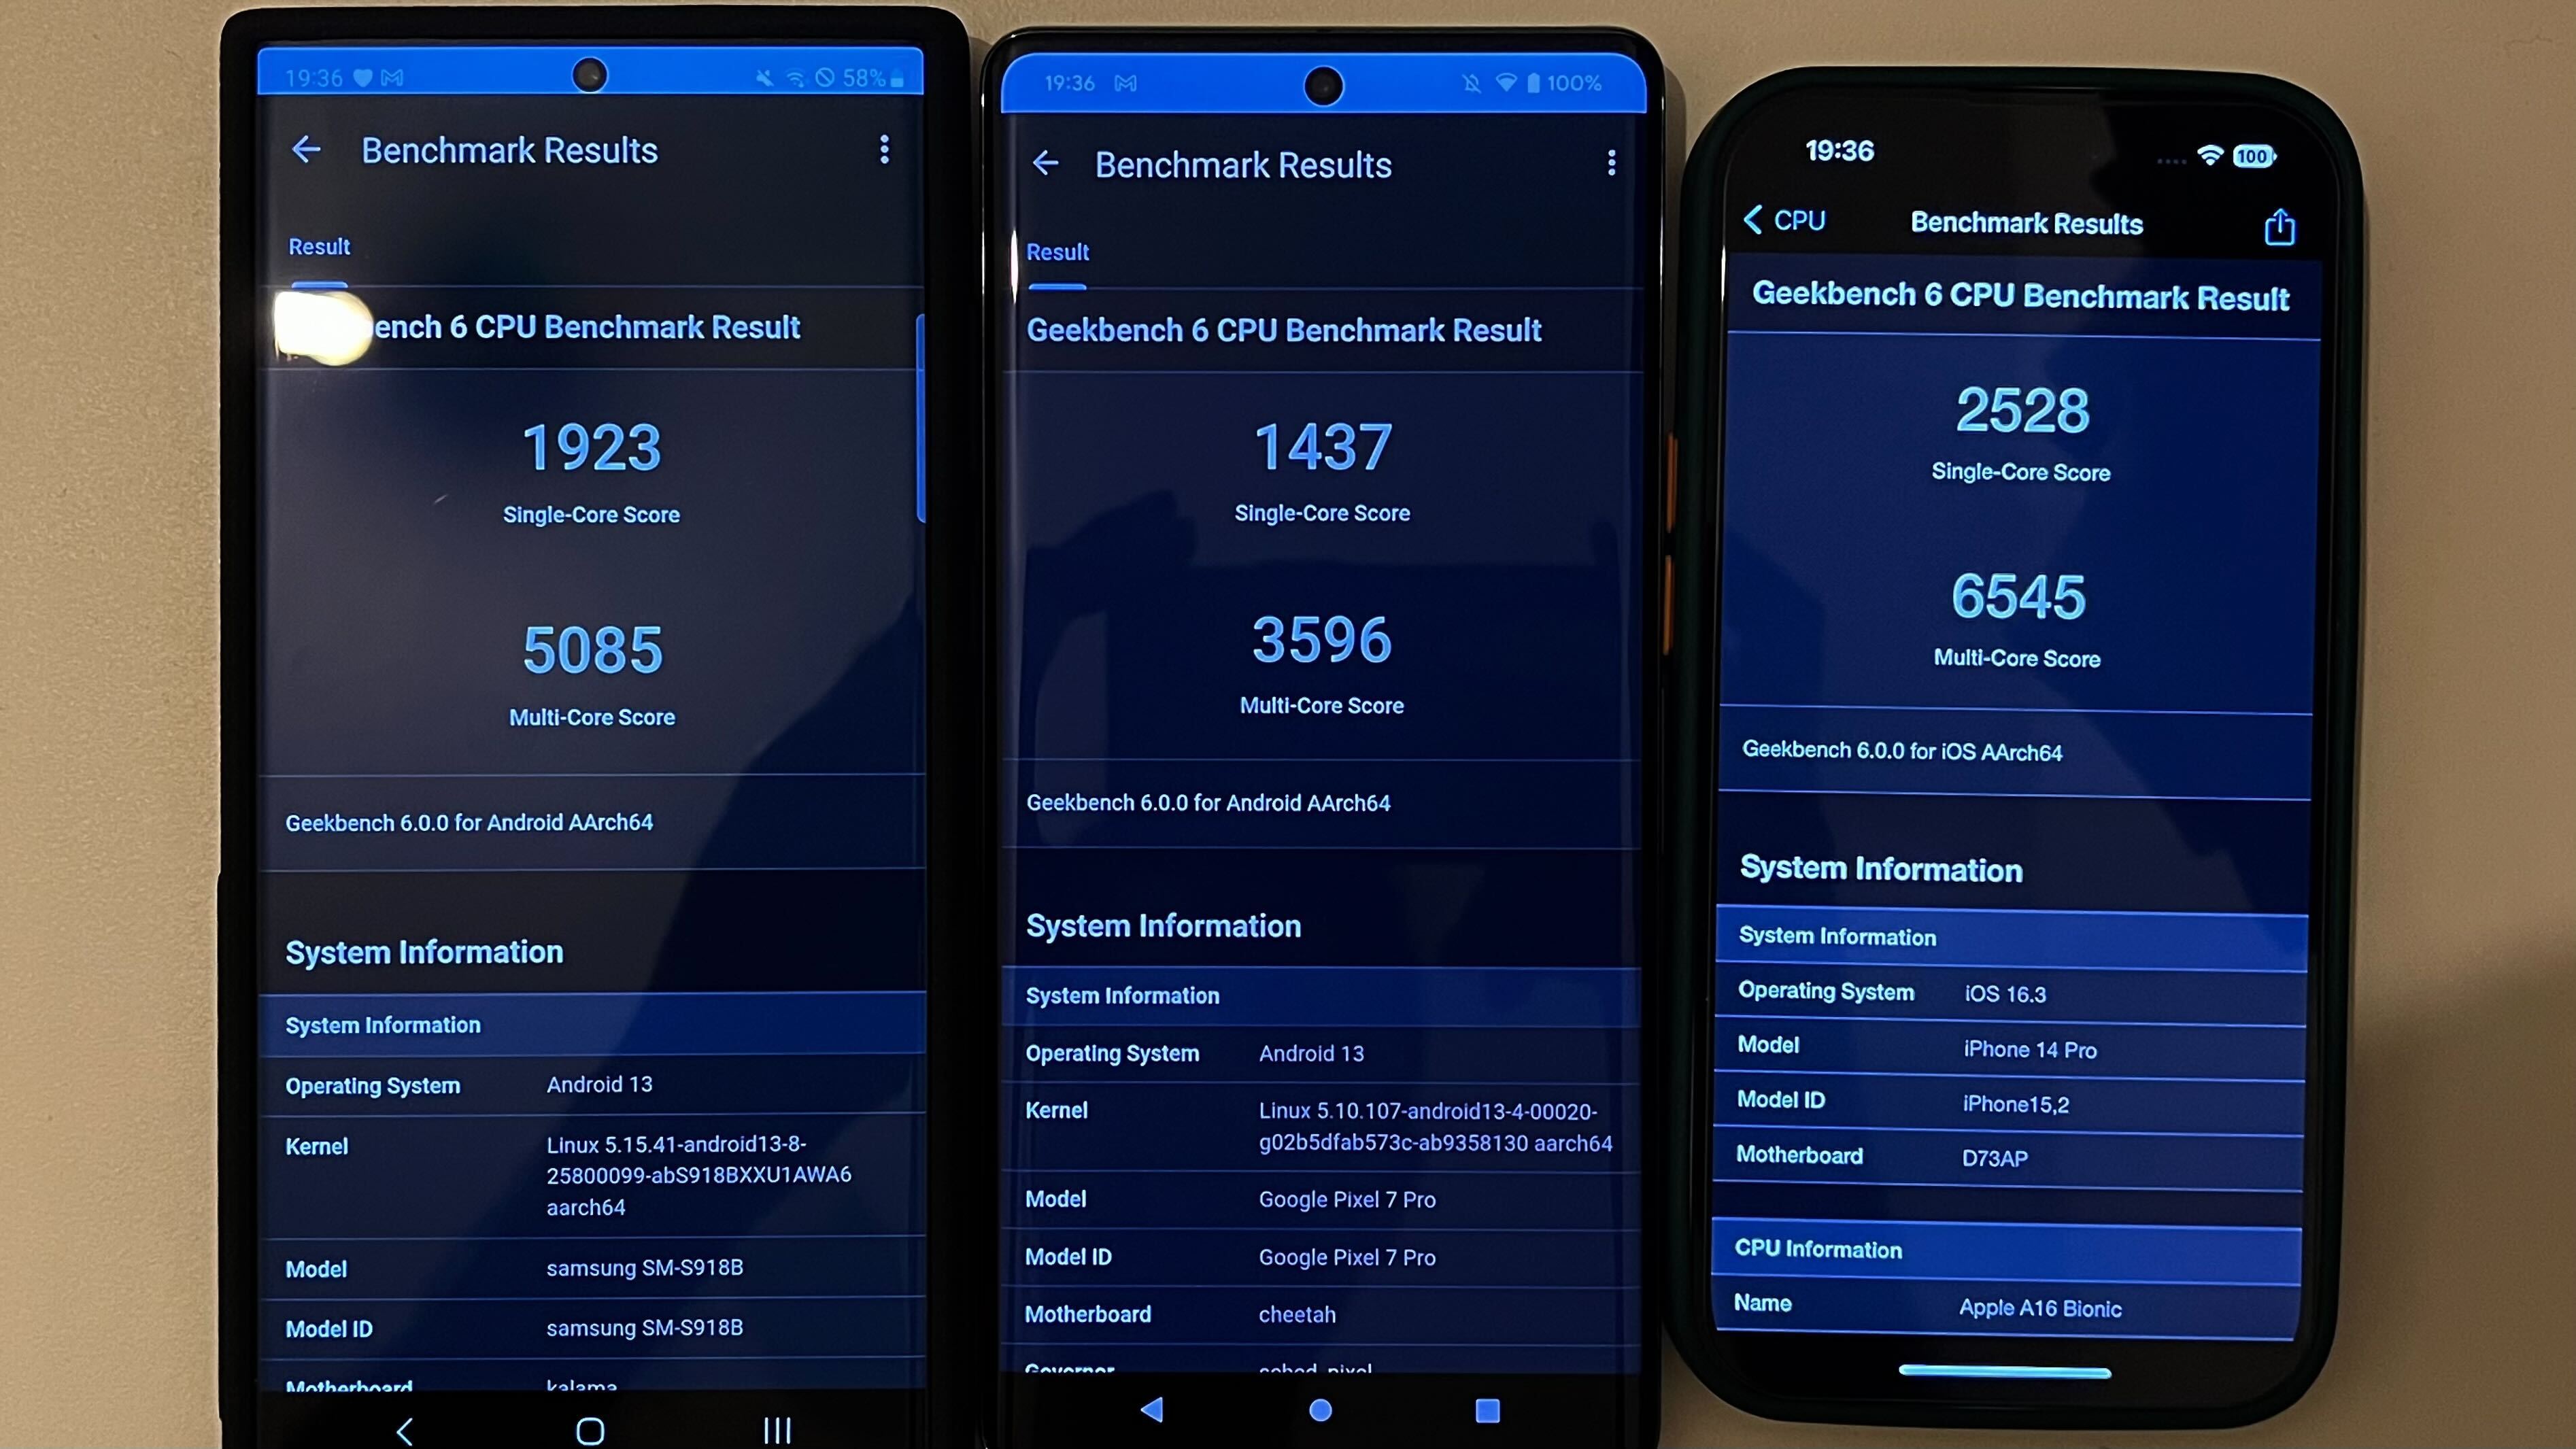  Galaxy S23 Ultra (left), Pixel 7 Pro (middle), iPhone 14 Pro (right). New, more demanding Geekbench 6 test puts iPhone 14 Pro far ahead Galaxy S23 Ultra, Pixel 7 Pro. - Apple “pays to make Galaxy S23 seem slower”, say Android users: True or false? Key CEO reacts